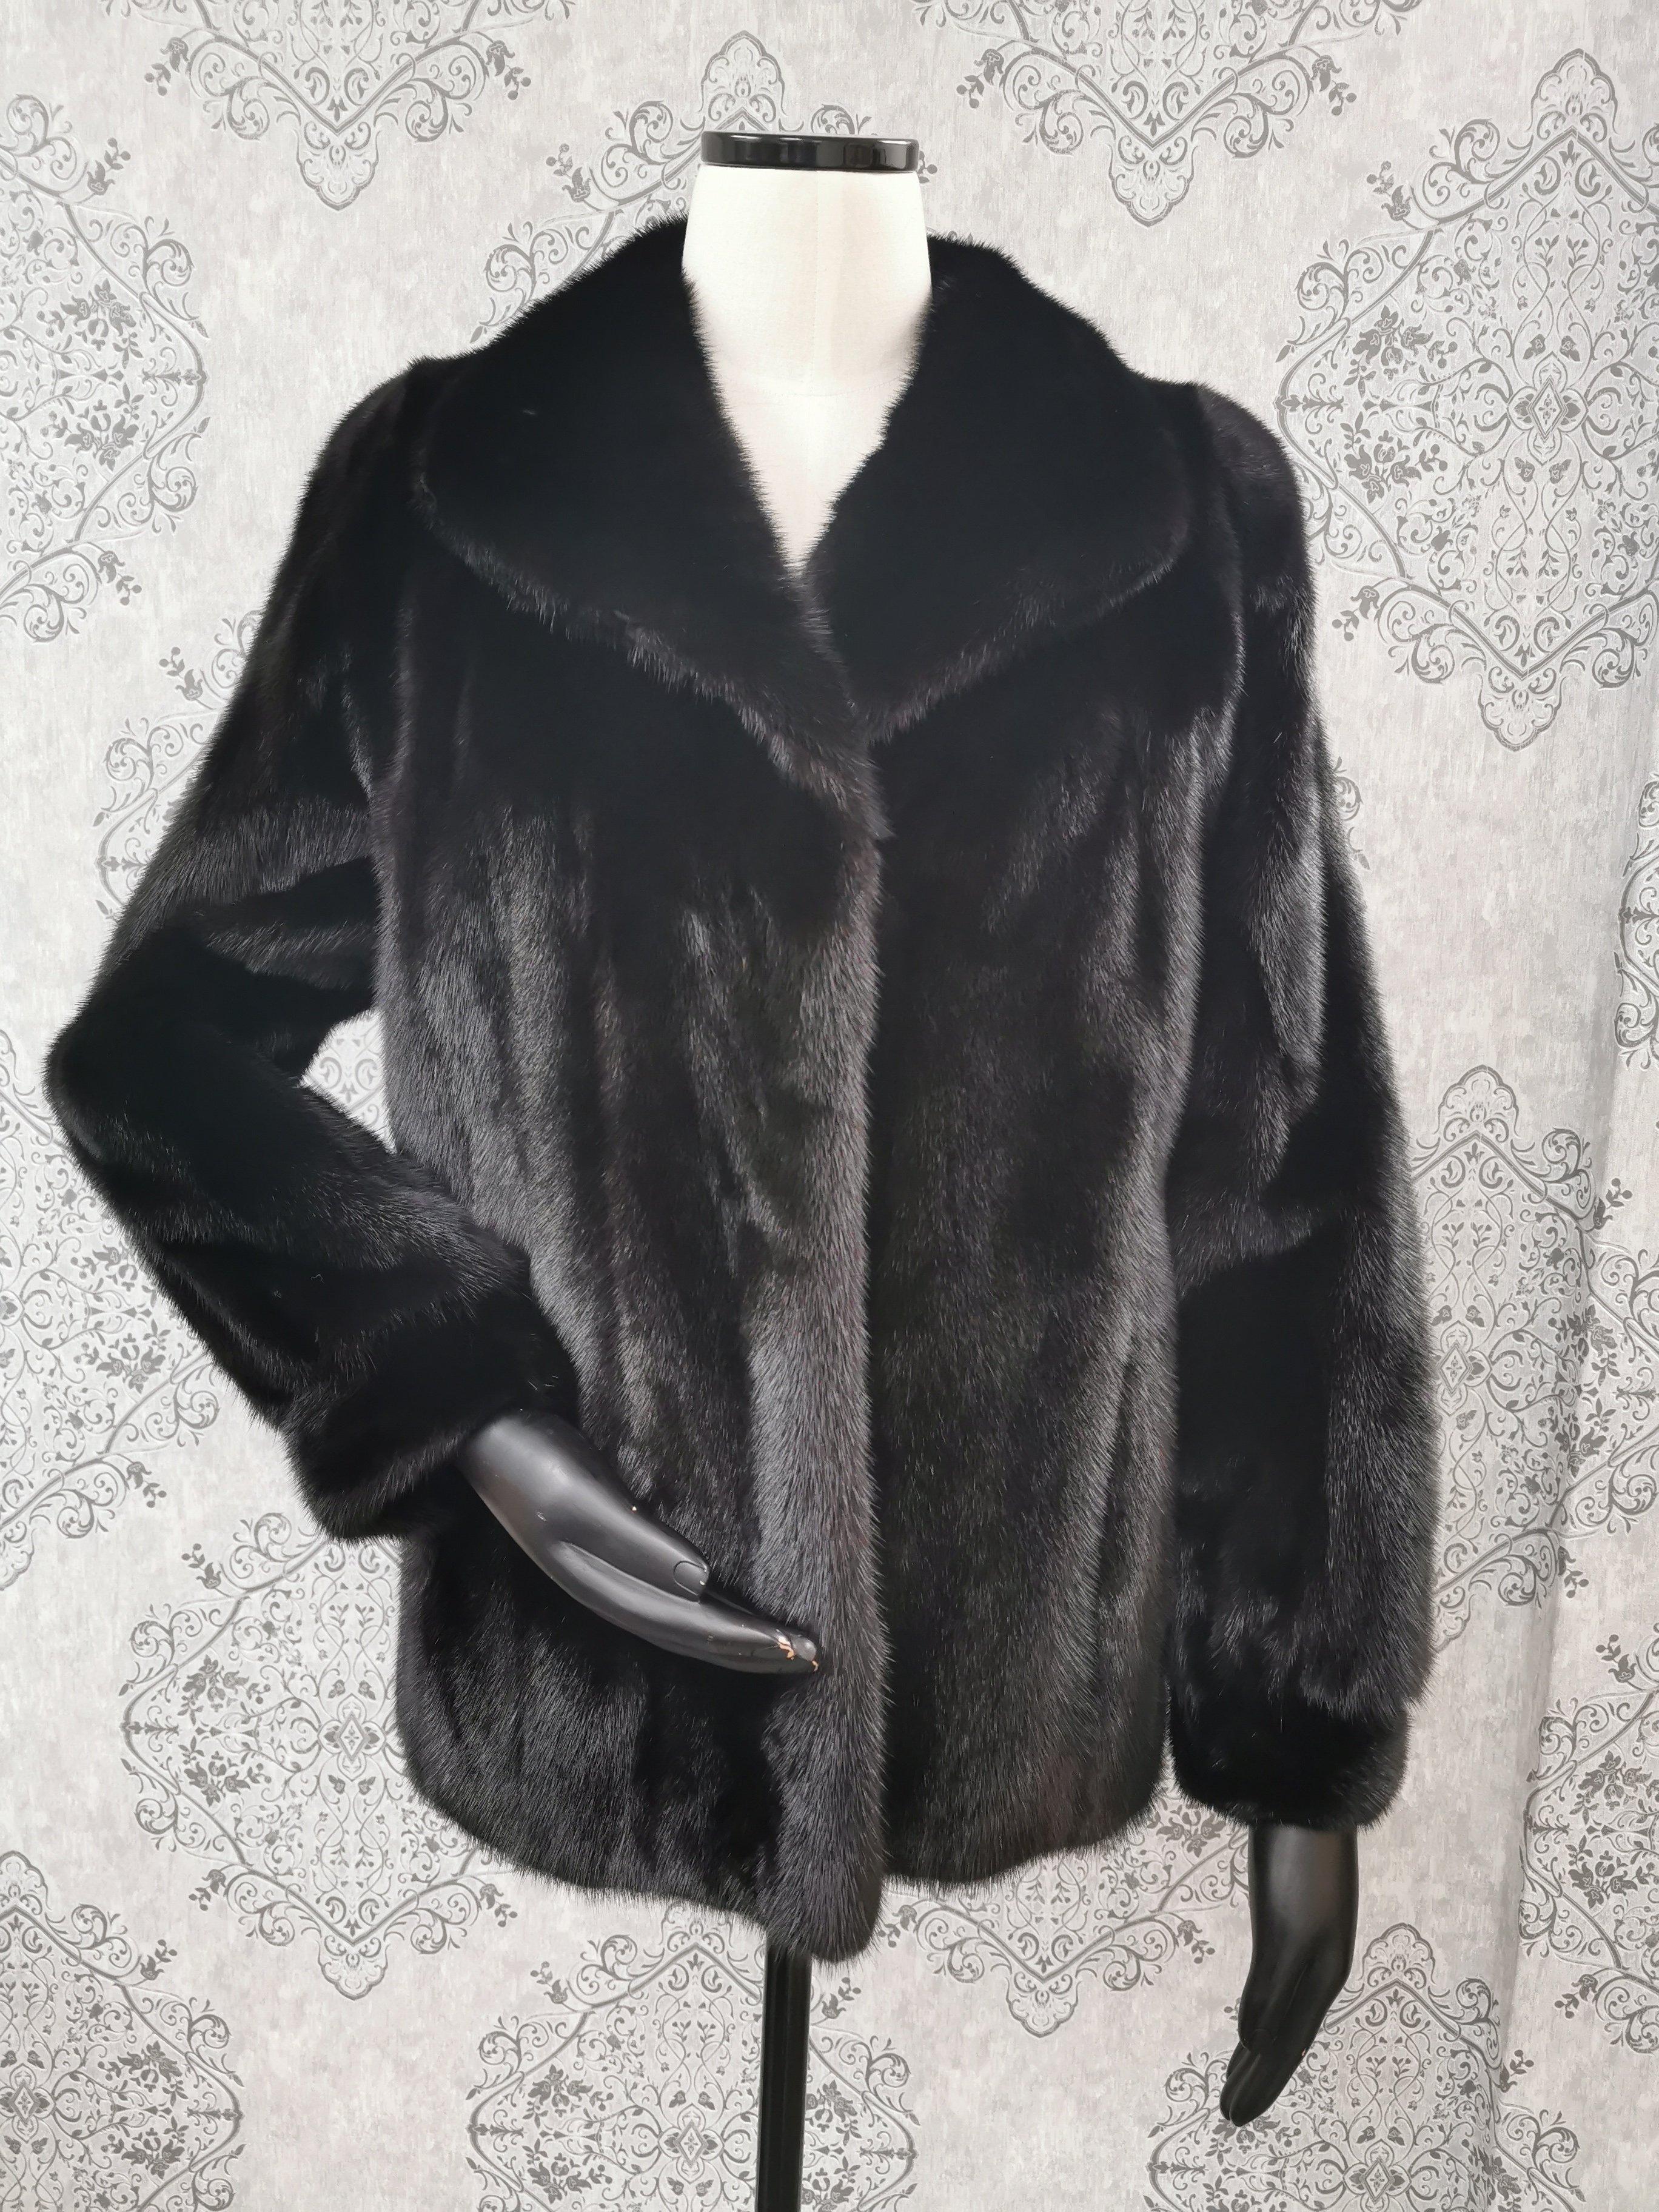 DESCRIPTION :  BRAND NEW SAGA MINK FUR COAT SIZE 12 :

Portrait collar, princess cuffs, supple skins, beautiful fresh fur, european german clasps for closure, too slit pockets, nice big full pelts skins in excellent condition.

This item is made in